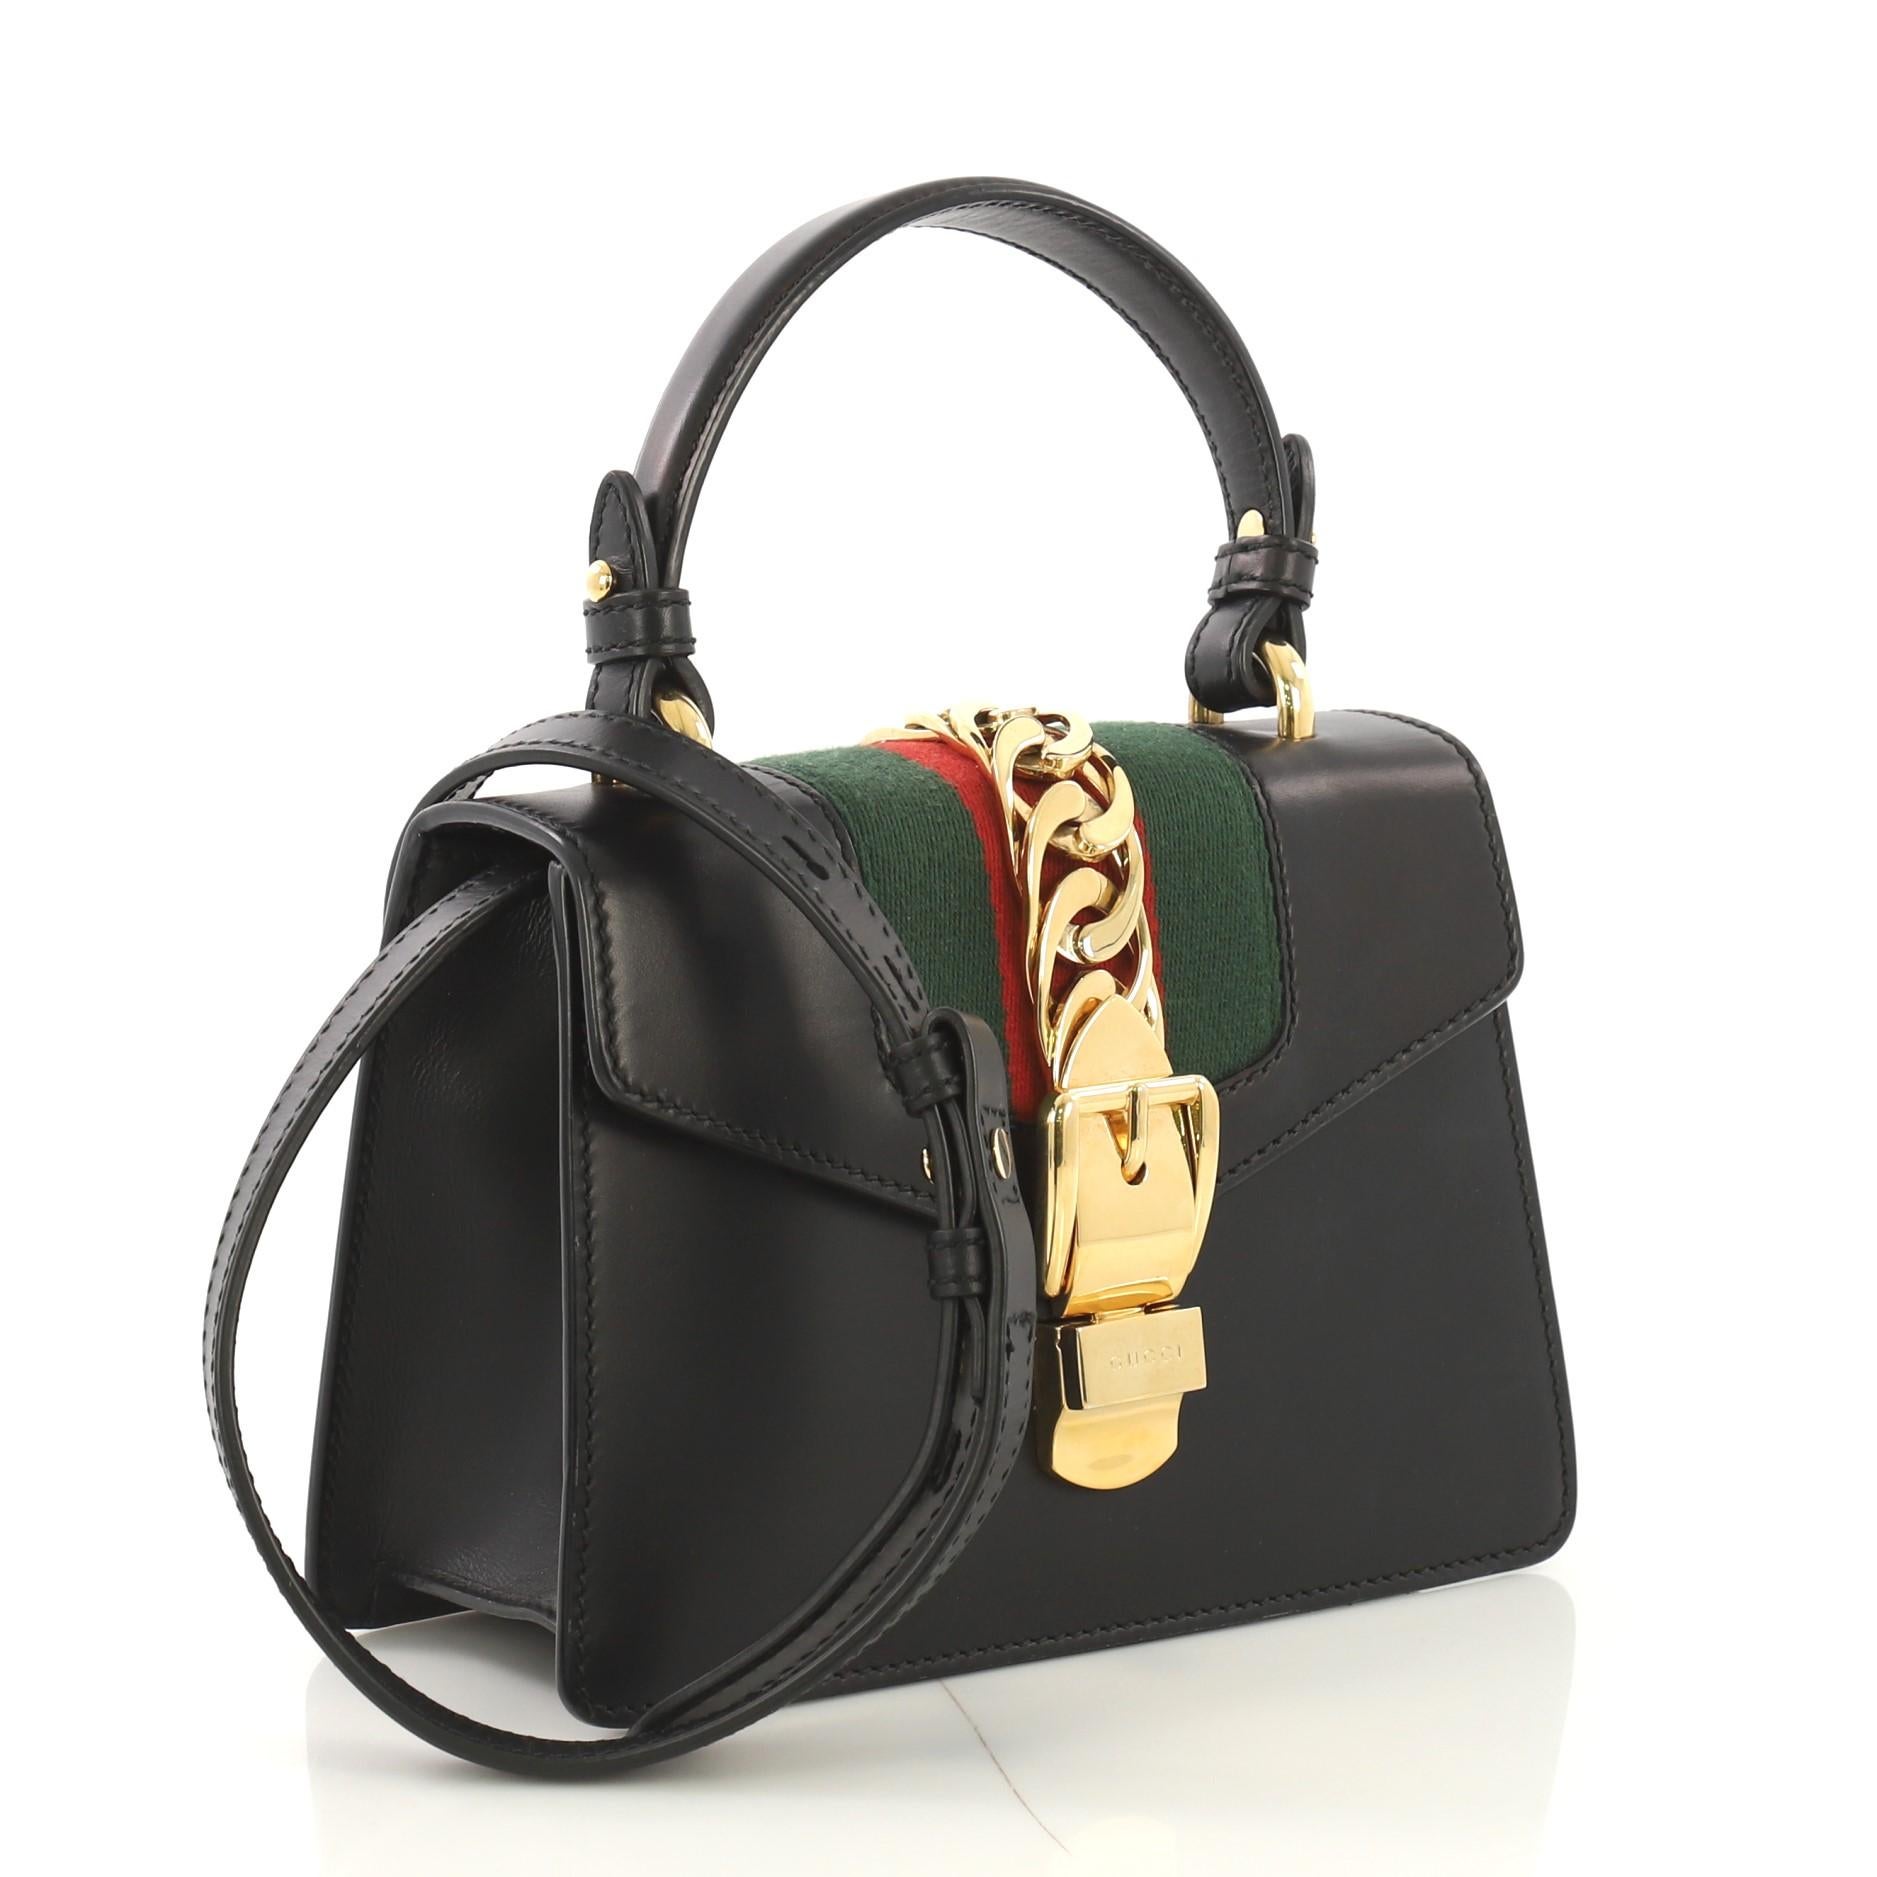 This Gucci Sylvie Top Handle Bag Leather Mini, crafted in black leather, features a single looped leather handle, nylon web detail with curb chain, and gold-tone hardware. Its buckle closure opens to a beige microfiber interior with slip pocket.